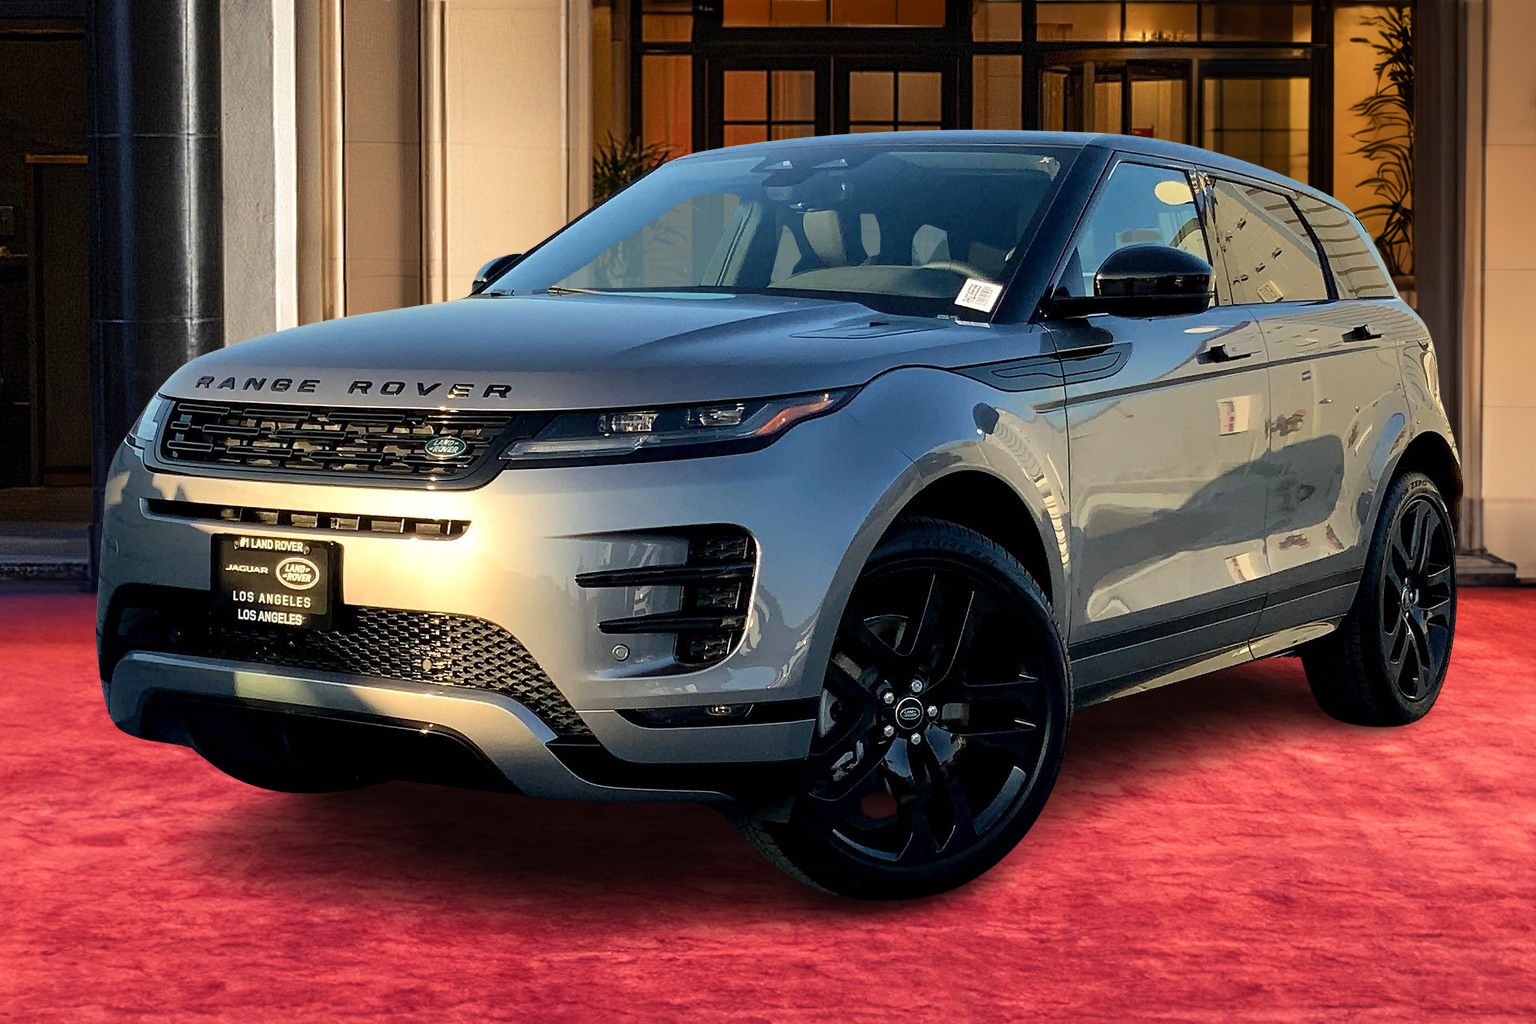 2021 Range Rover Evoque Price and Trims Overview